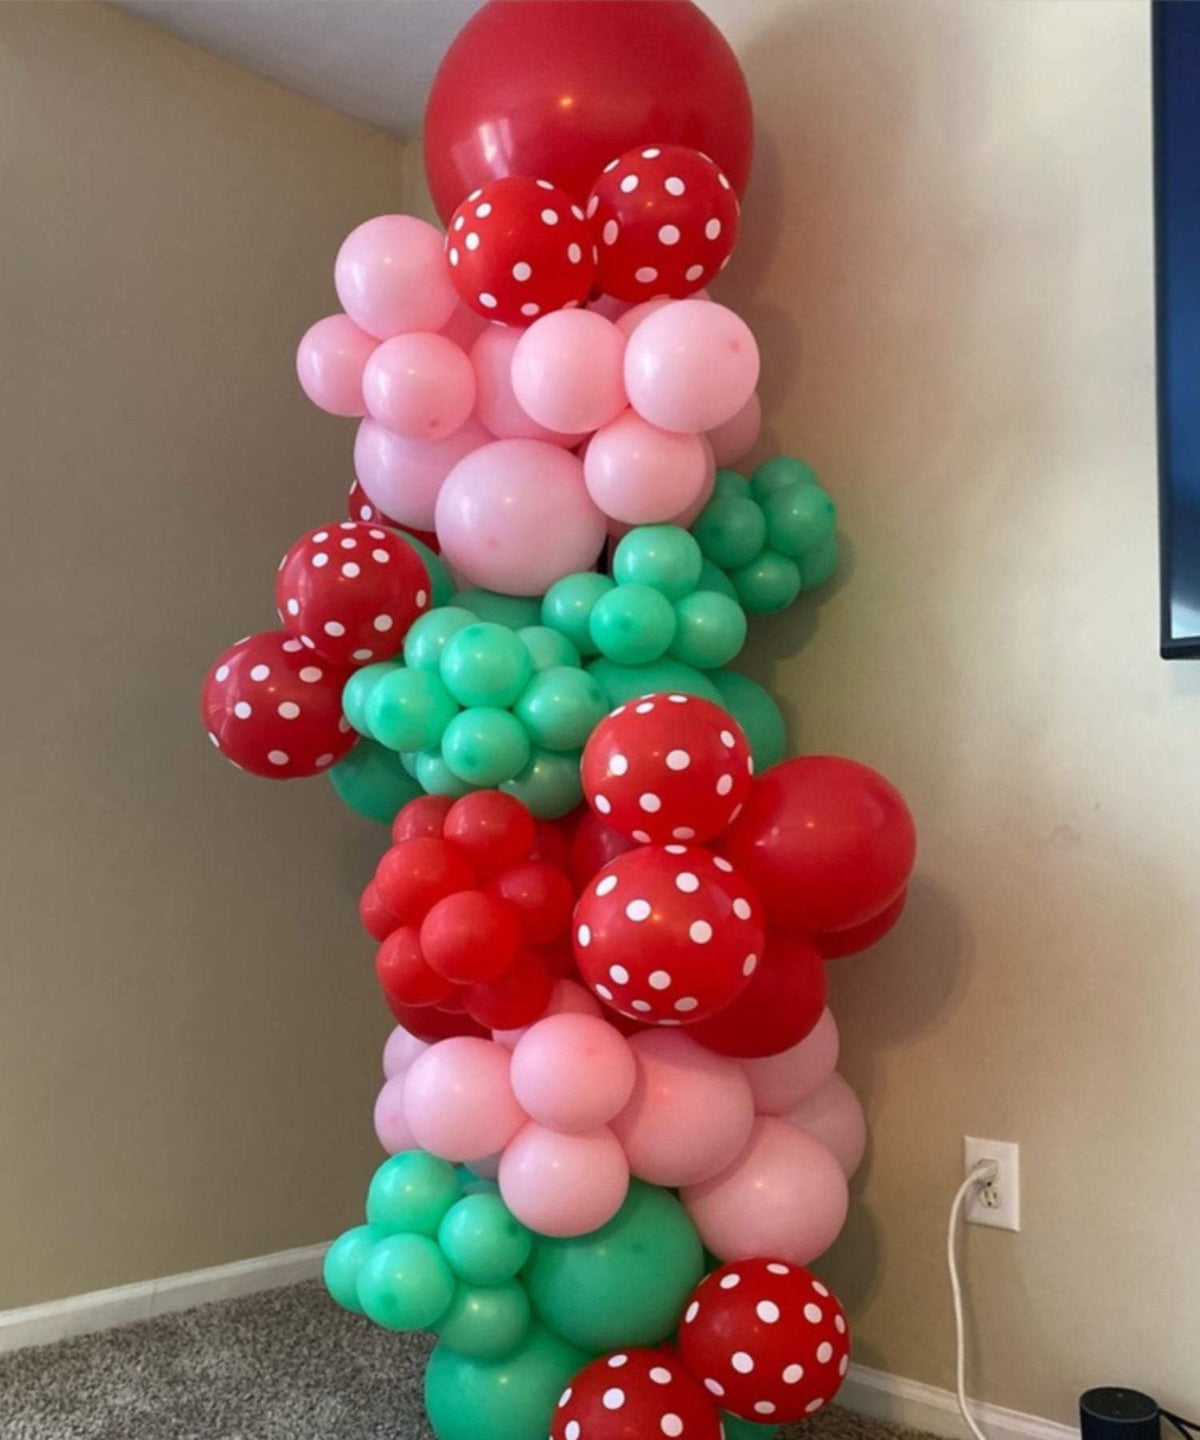 red-pink-green-balloon-decor-column-for-weddings-birthday-parties-blissful-journeys